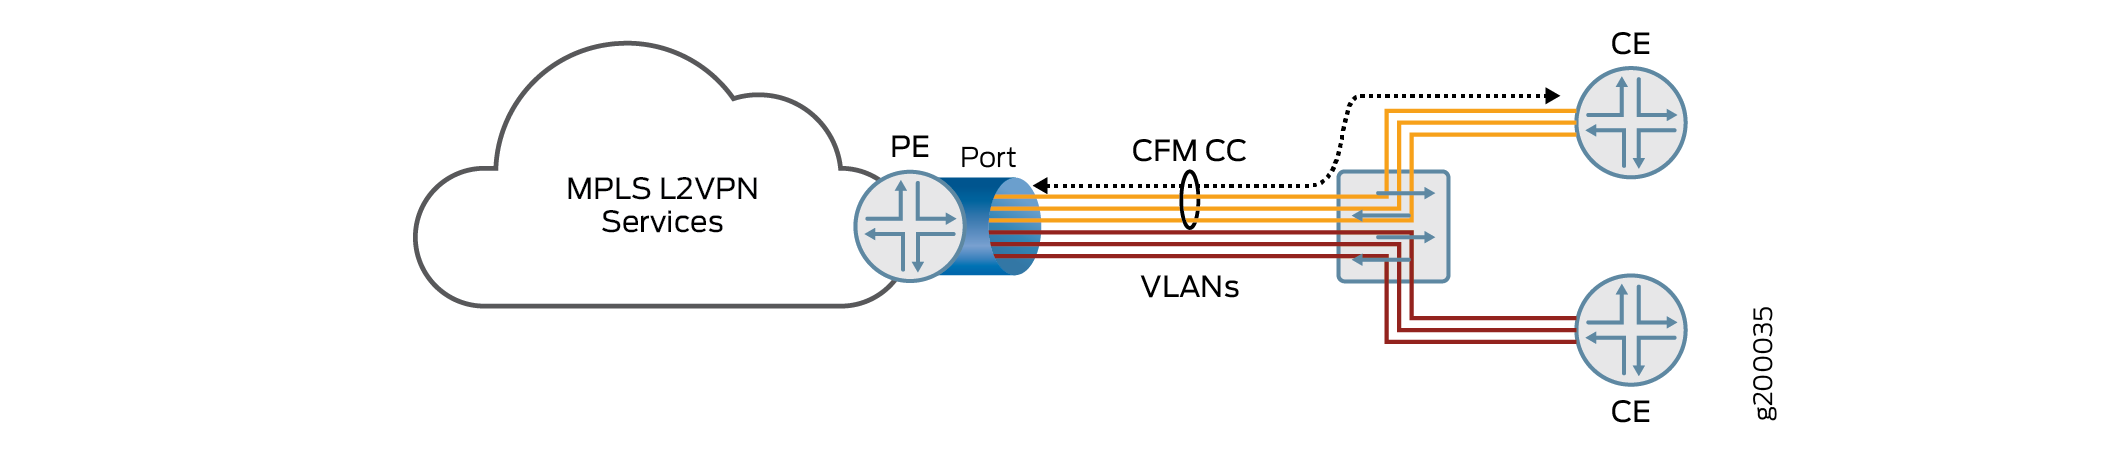 Topology of Multiple VLAN Services Sharing a Single Port on PE Router Destined to Multiple CE Routers